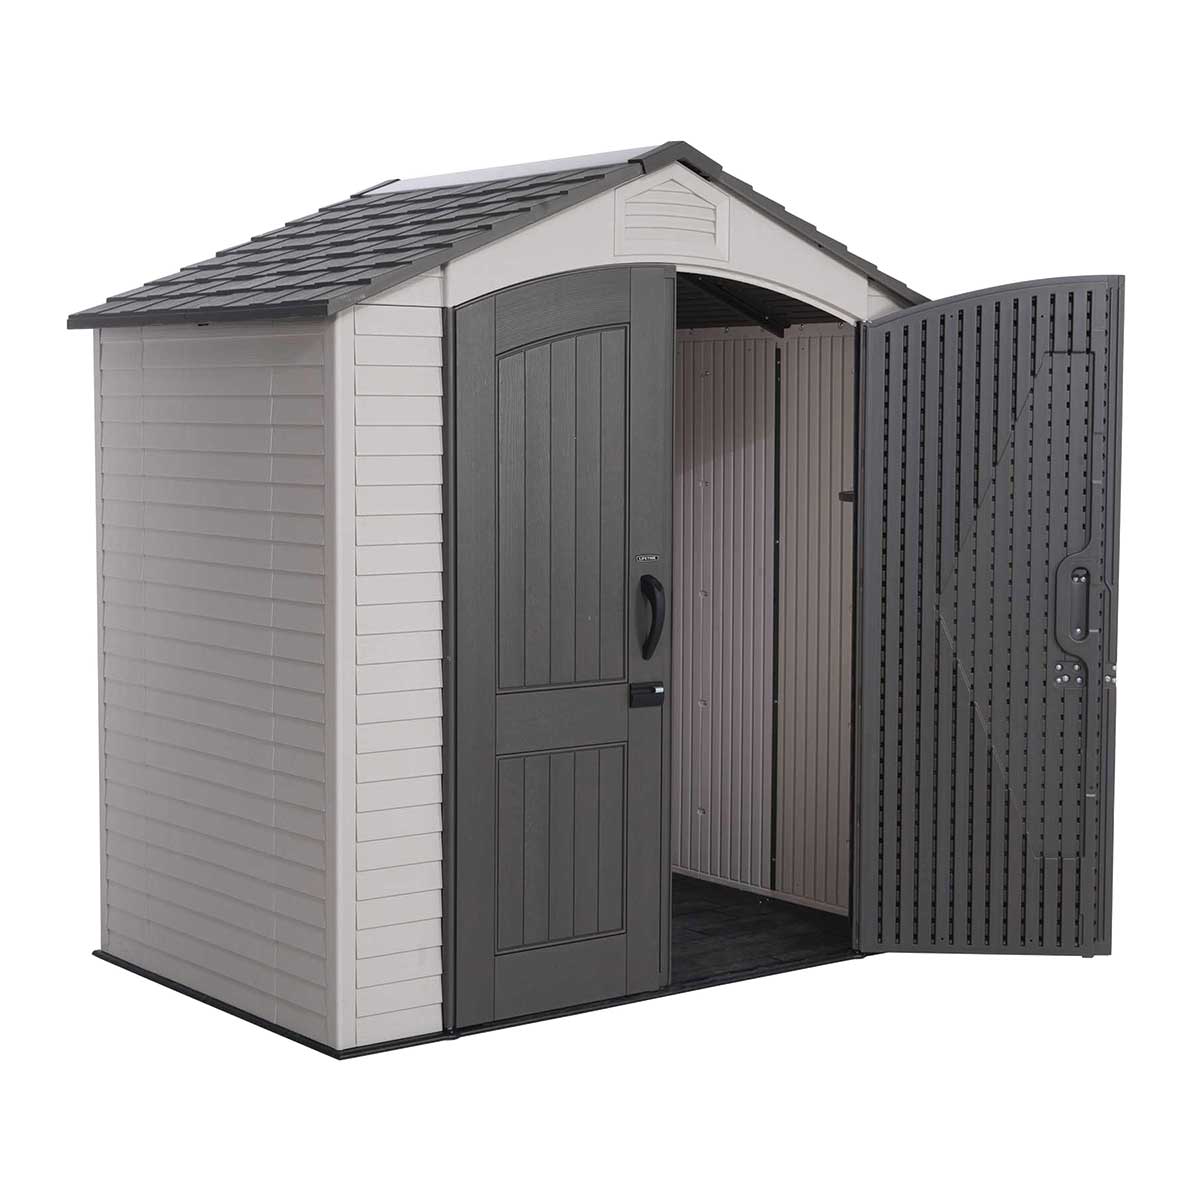 Lifetime 7 Ft. x 4.5 Ft. Outdoor Storage Shed